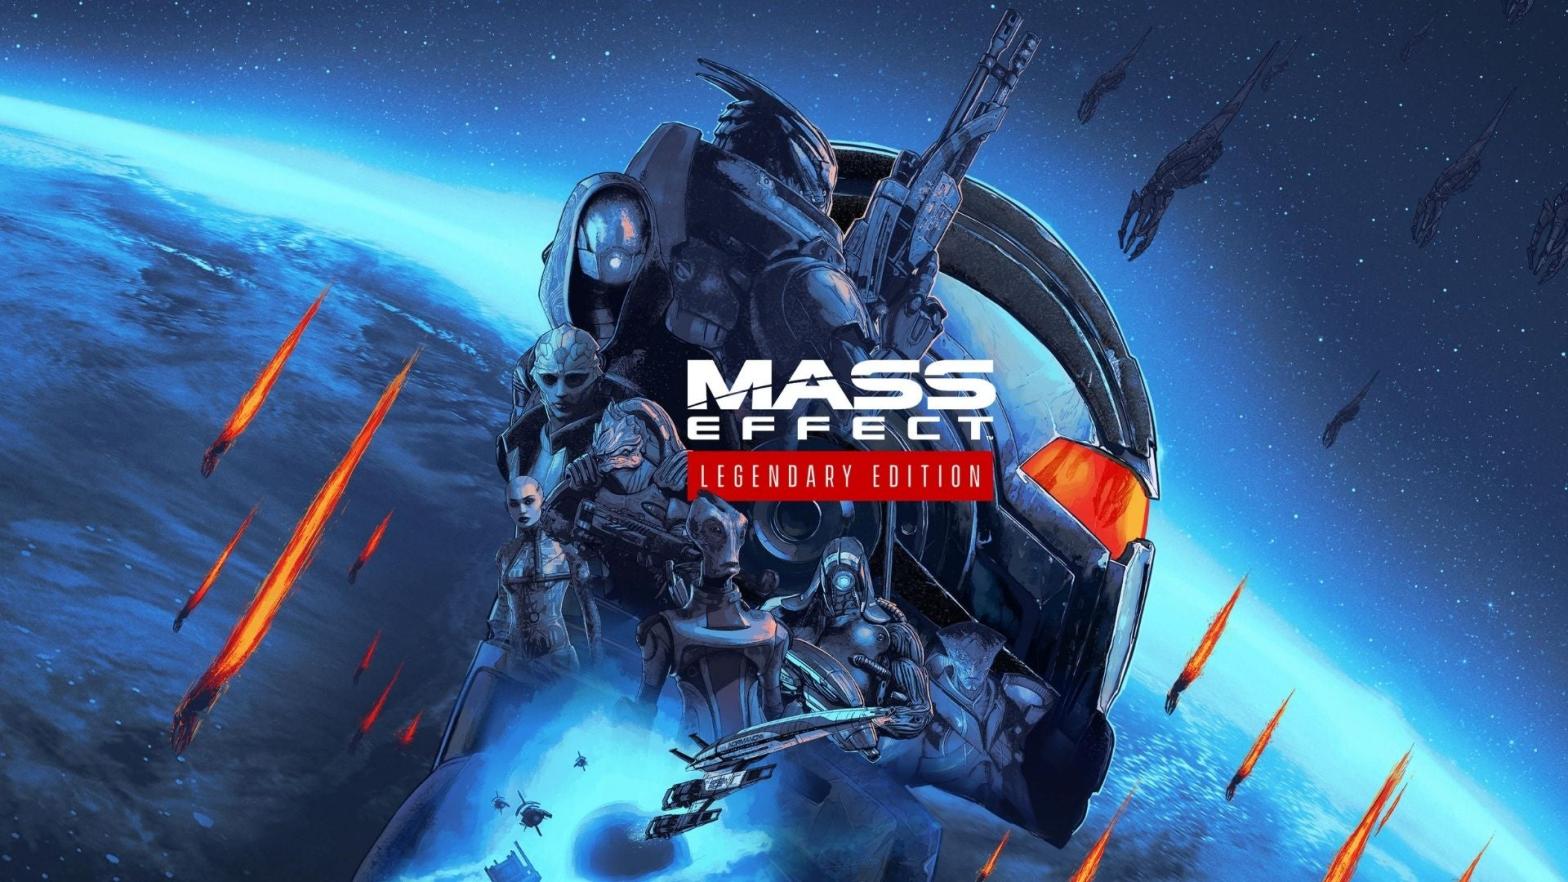 There it is, the perfect Mass Effect Legendary Edition logo. (Image: BioWare)